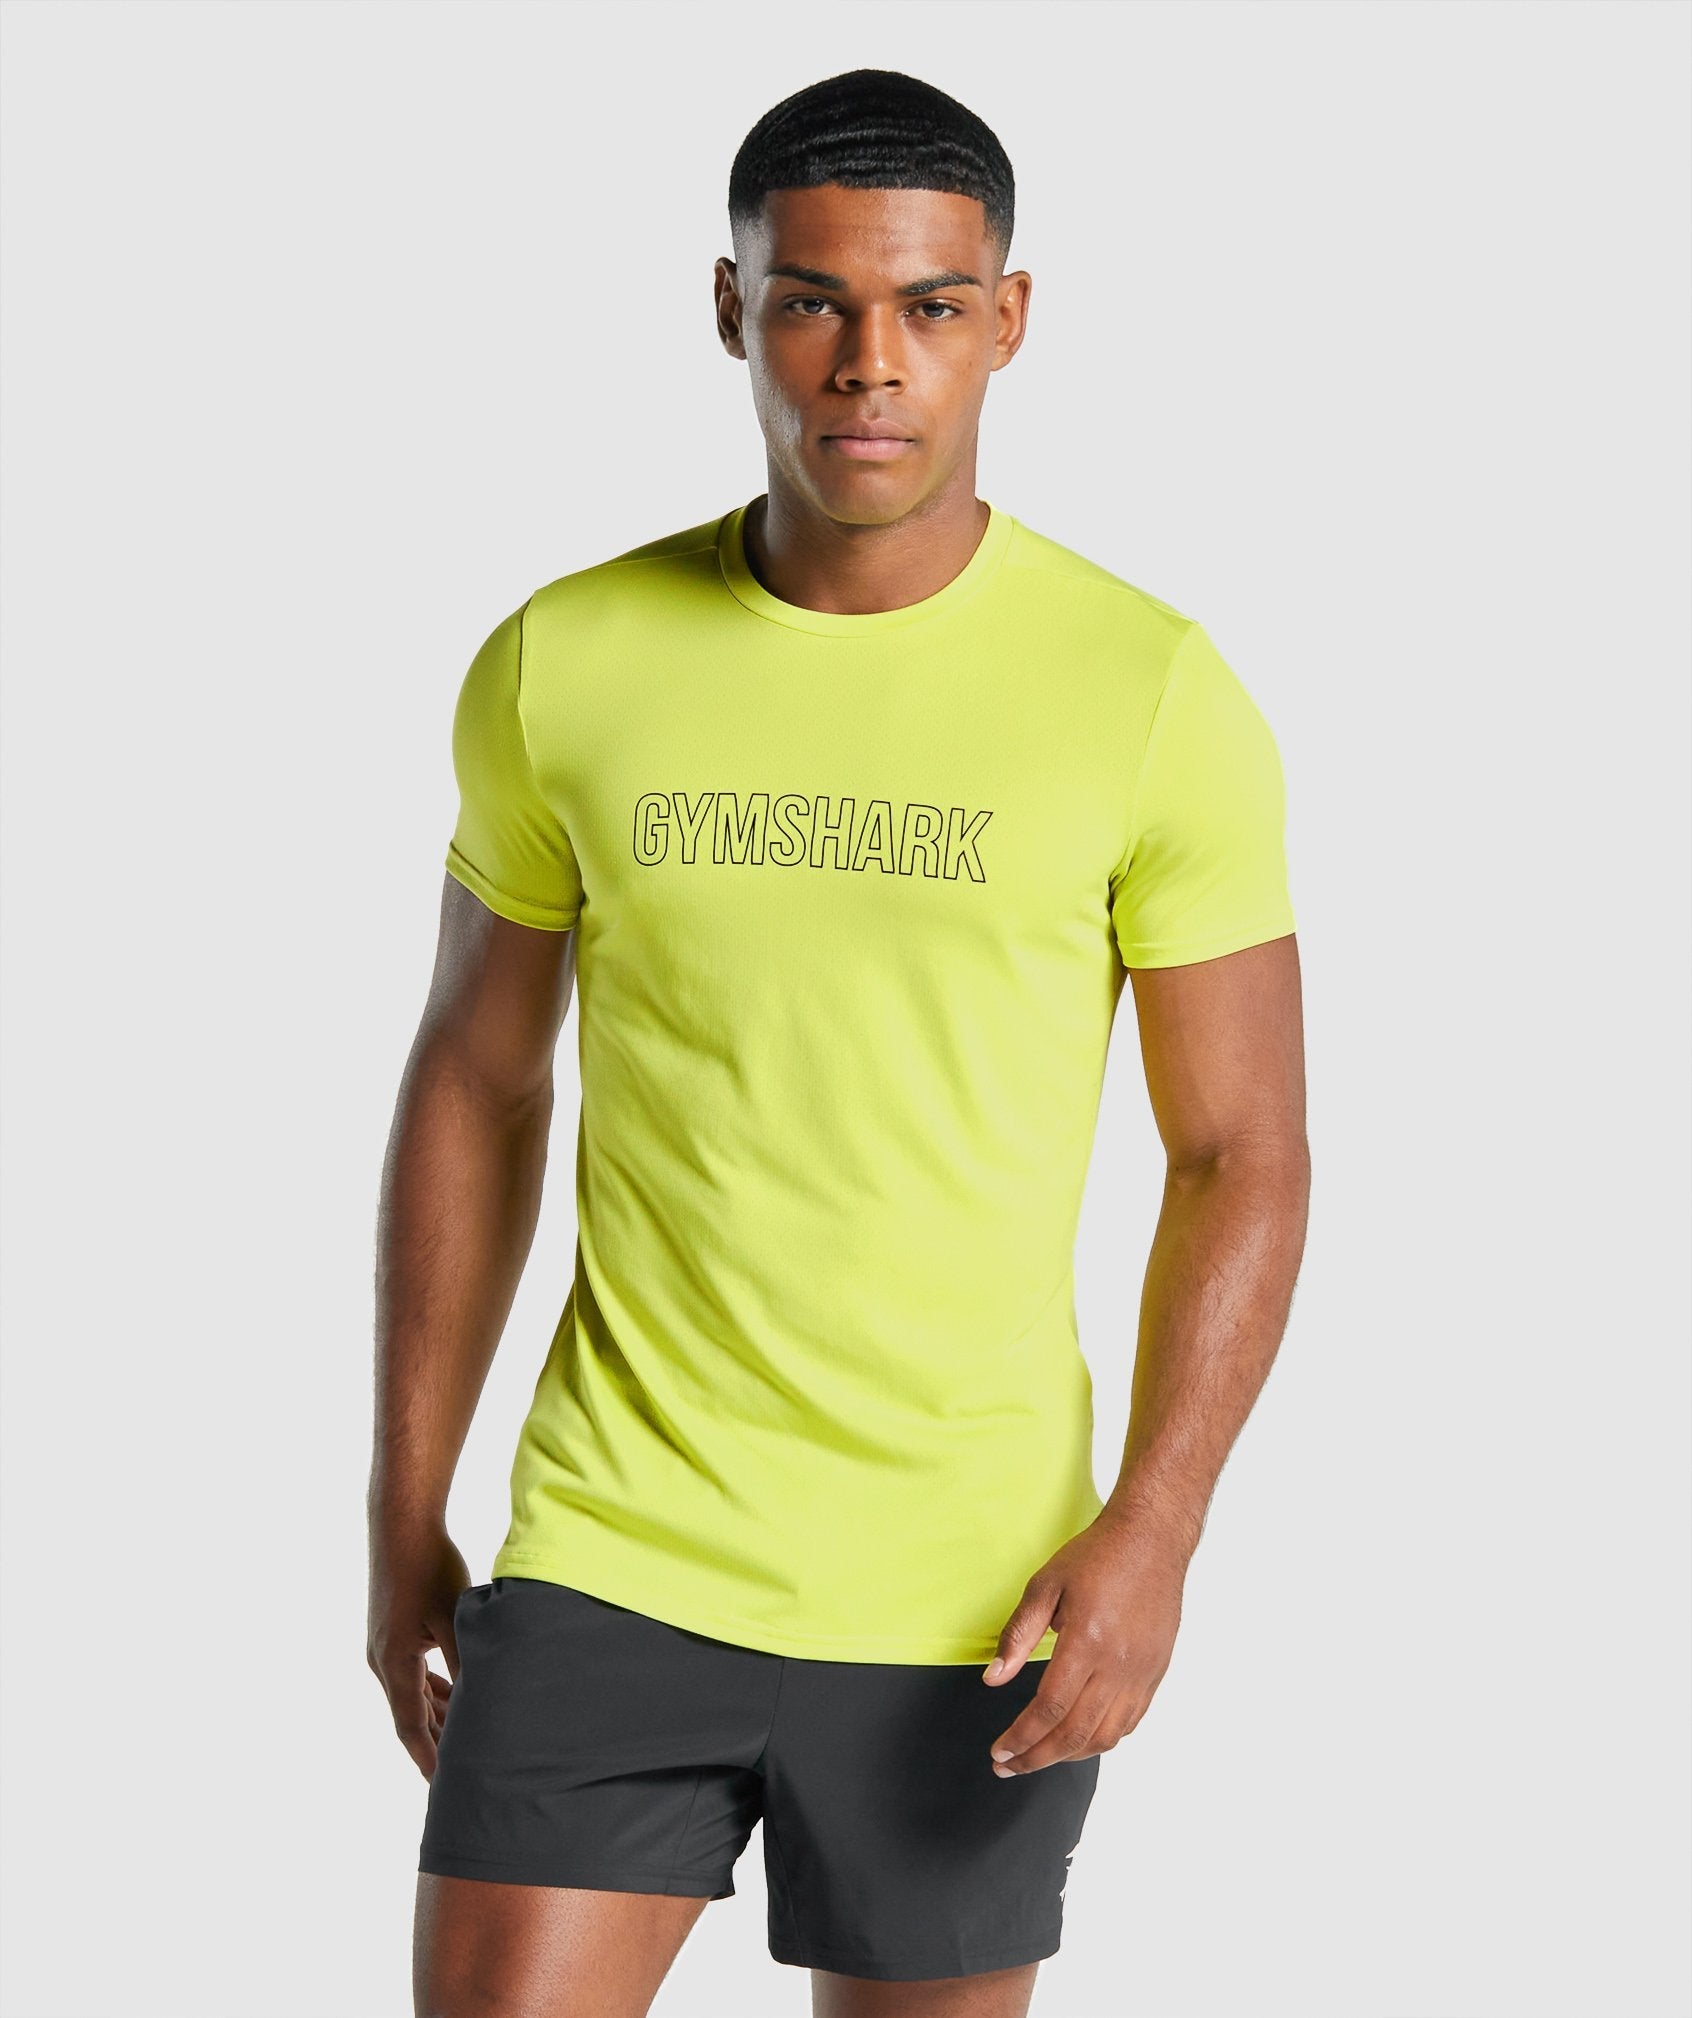 Arrival Graphic T-Shirt in Yellow